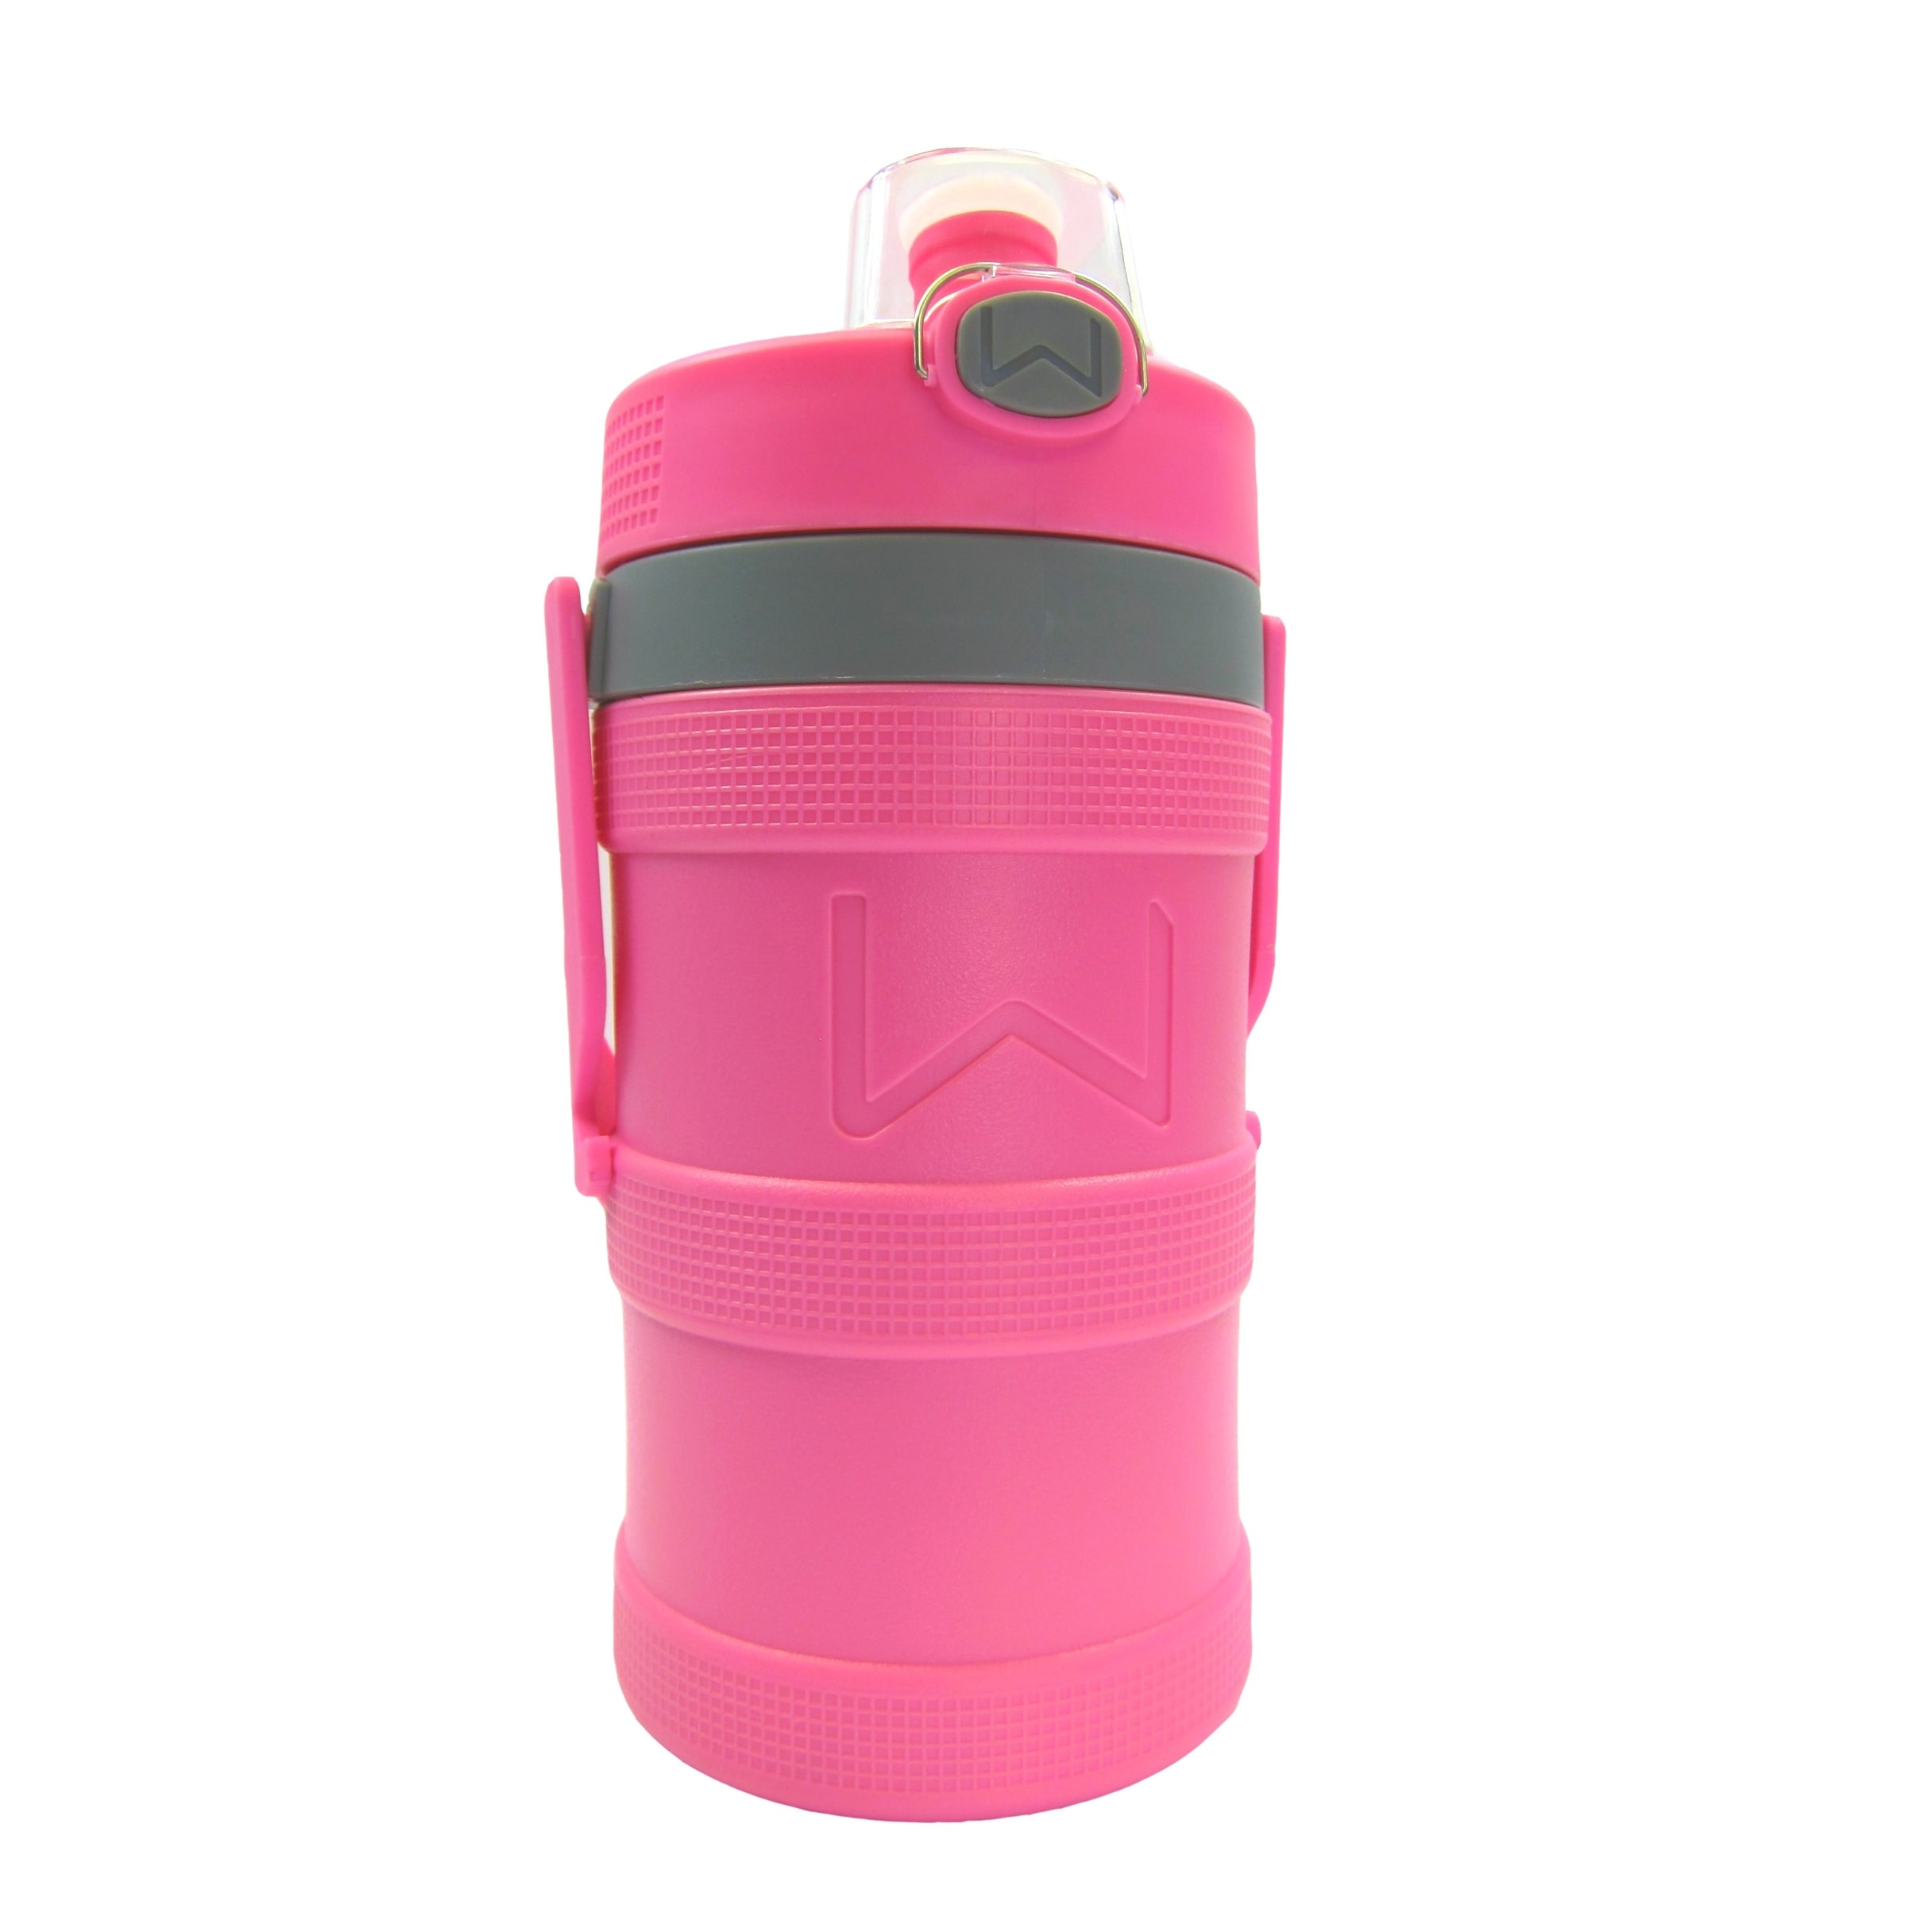 https://ak1.ostkcdn.com/images/products/is/images/direct/81bfbba5ac1e68101bcc87b1e3ae795c0786dfc5/Wellness-Foam-Insulated-Water-Bottle-with-Carry-Handle-and-Hook-128-oz.---Pink.jpg